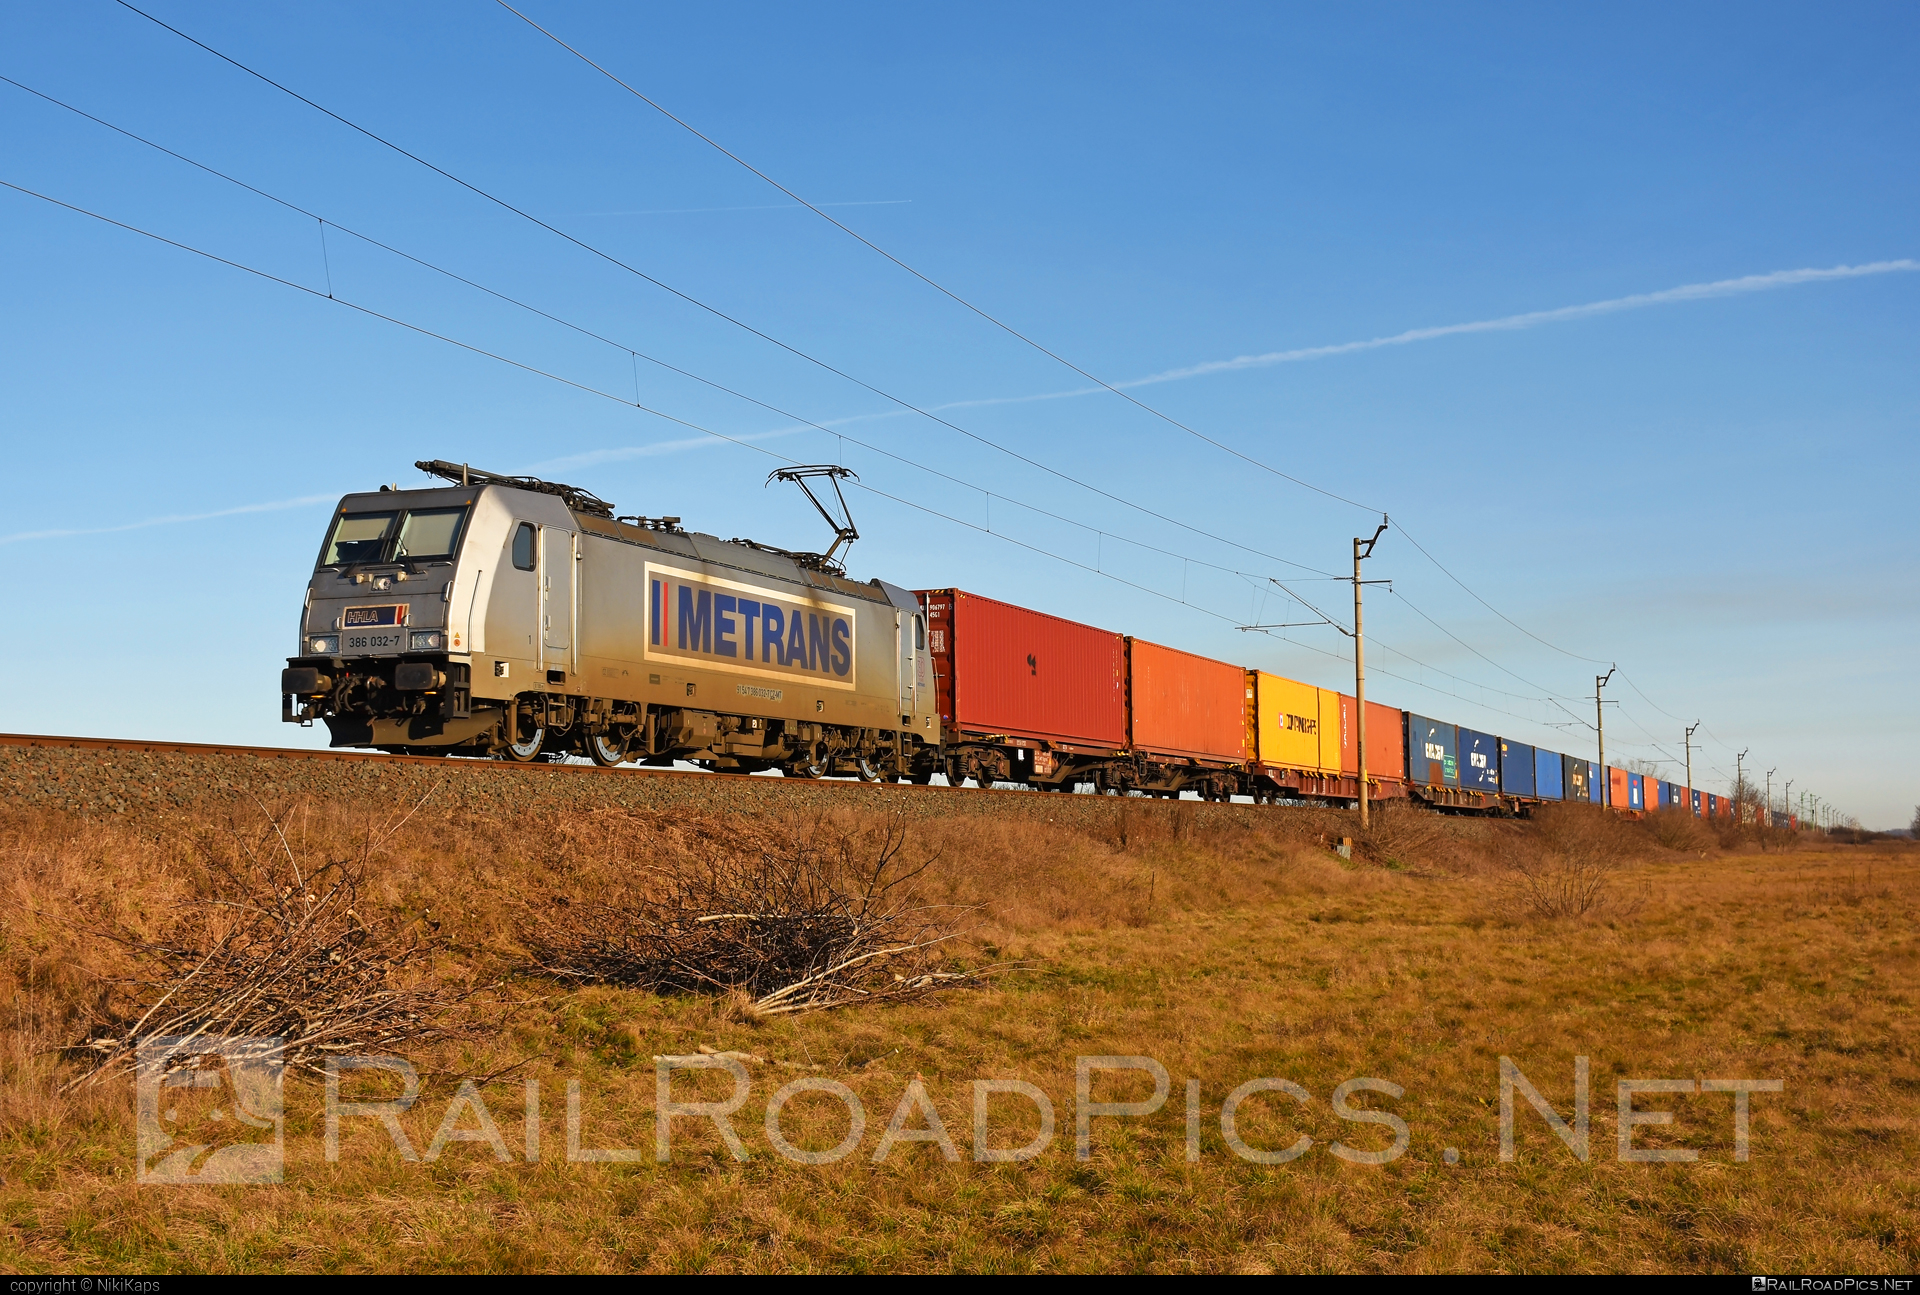 Bombardier TRAXX F140 MS - 386 032-7 operated by METRANS Rail s.r.o. #bombardier #bombardiertraxx #container #flatwagon #hhla #metrans #metransrail #traxx #traxxf140 #traxxf140ms